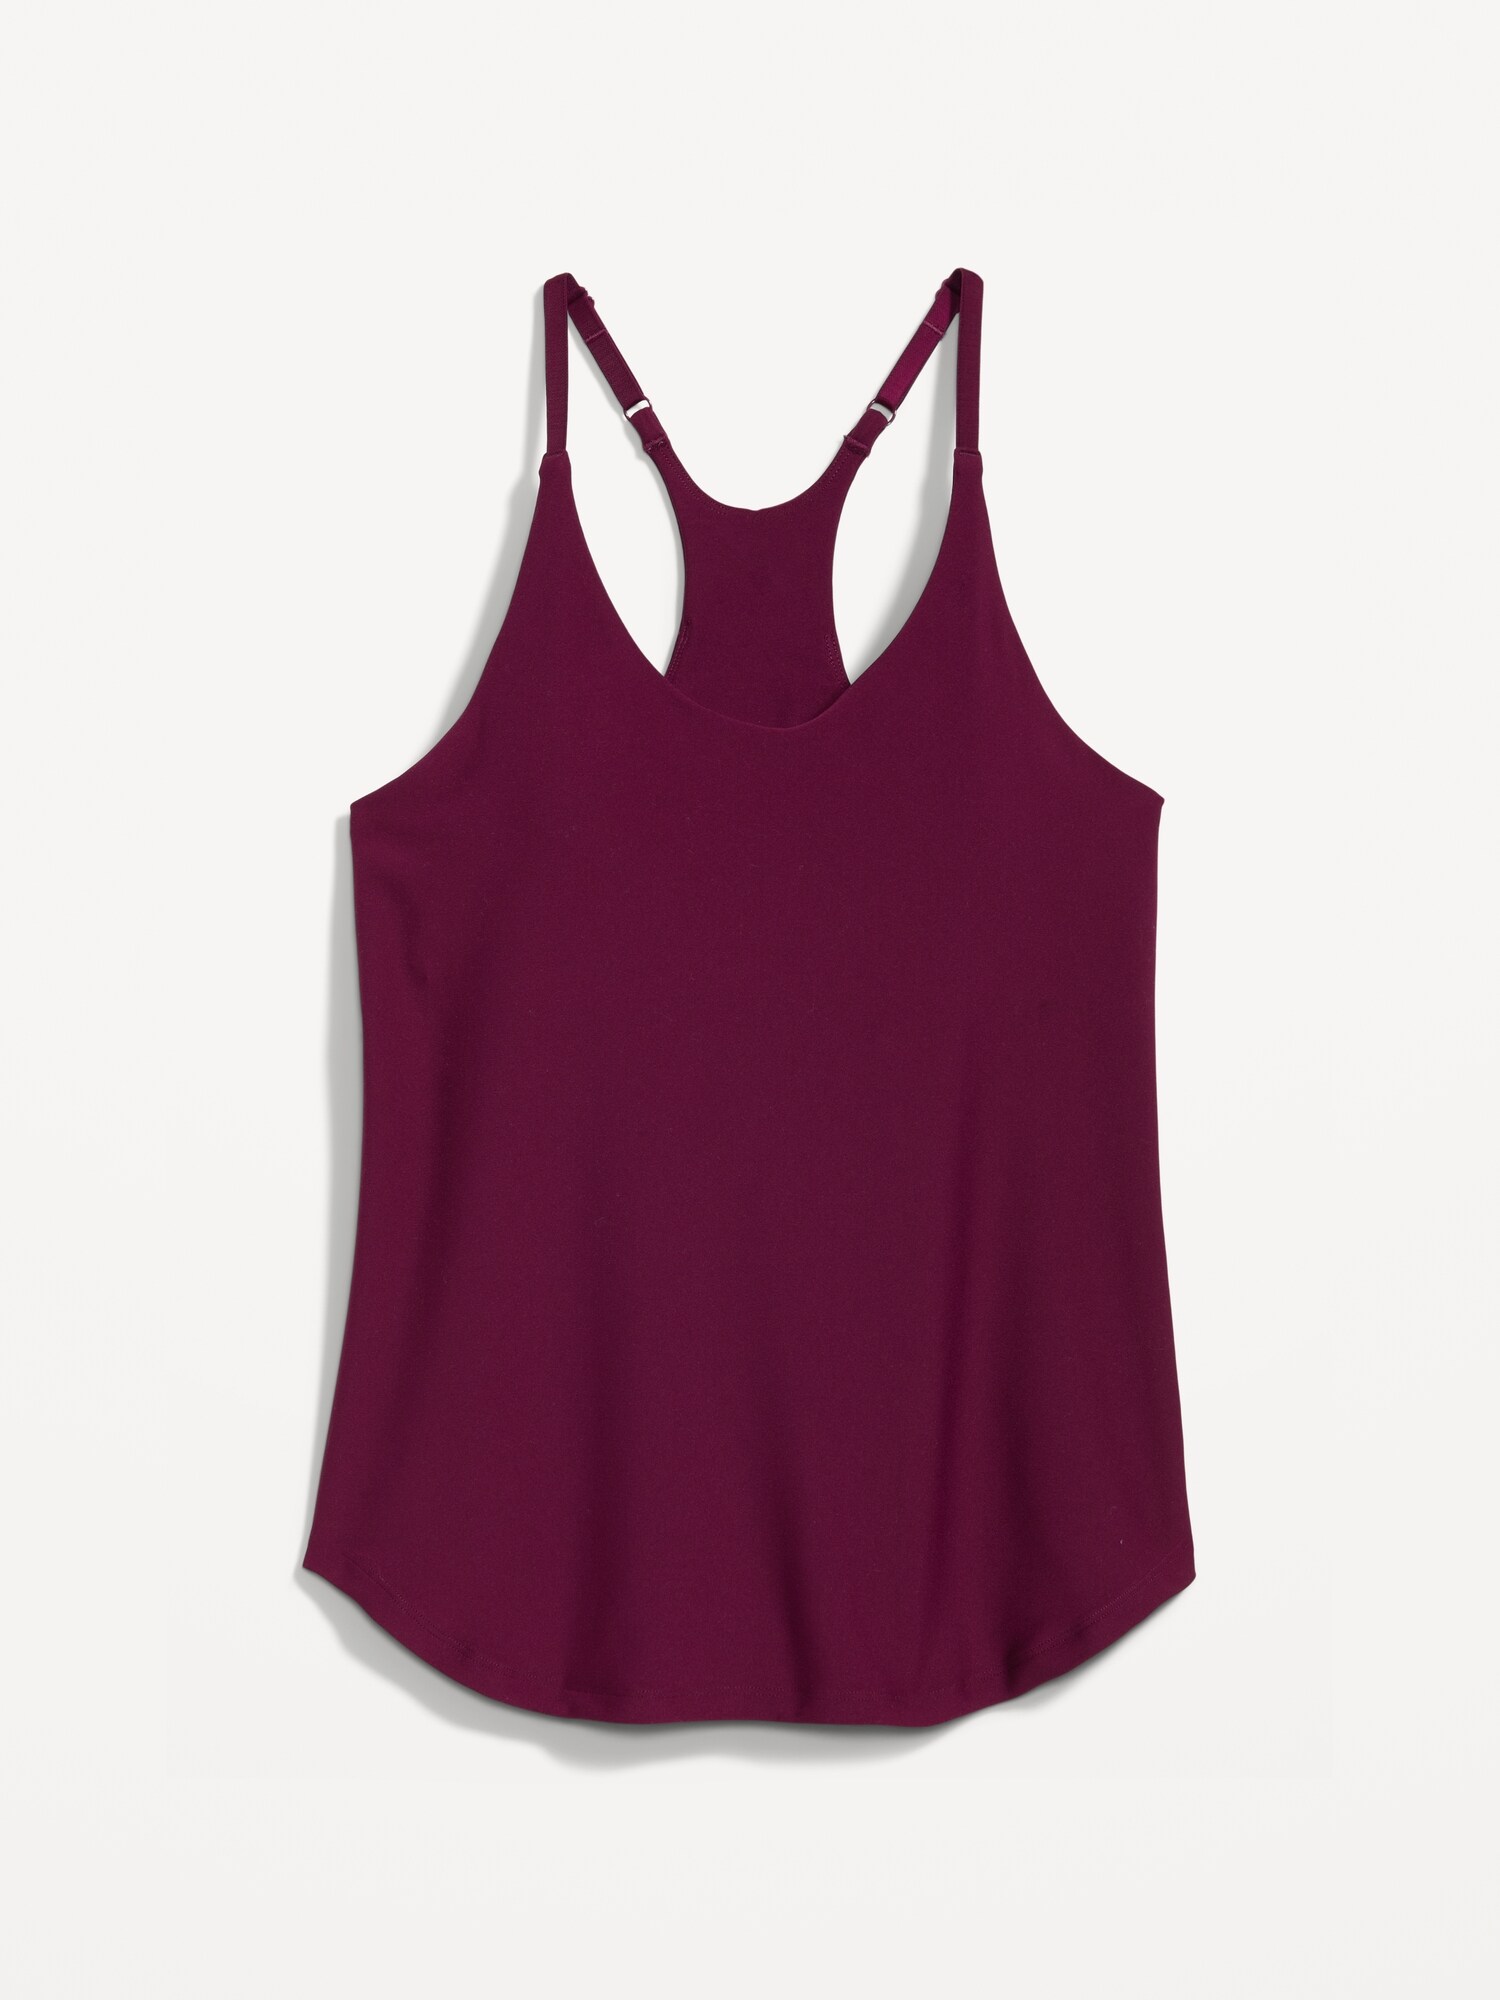 Old Navy NWT Brown PowerLite LYCRA ADAPTIV Racerback Shelf-Bra Active Tank  Top Size L - $35 (12% Off Retail) New With Tags - From Lindsay